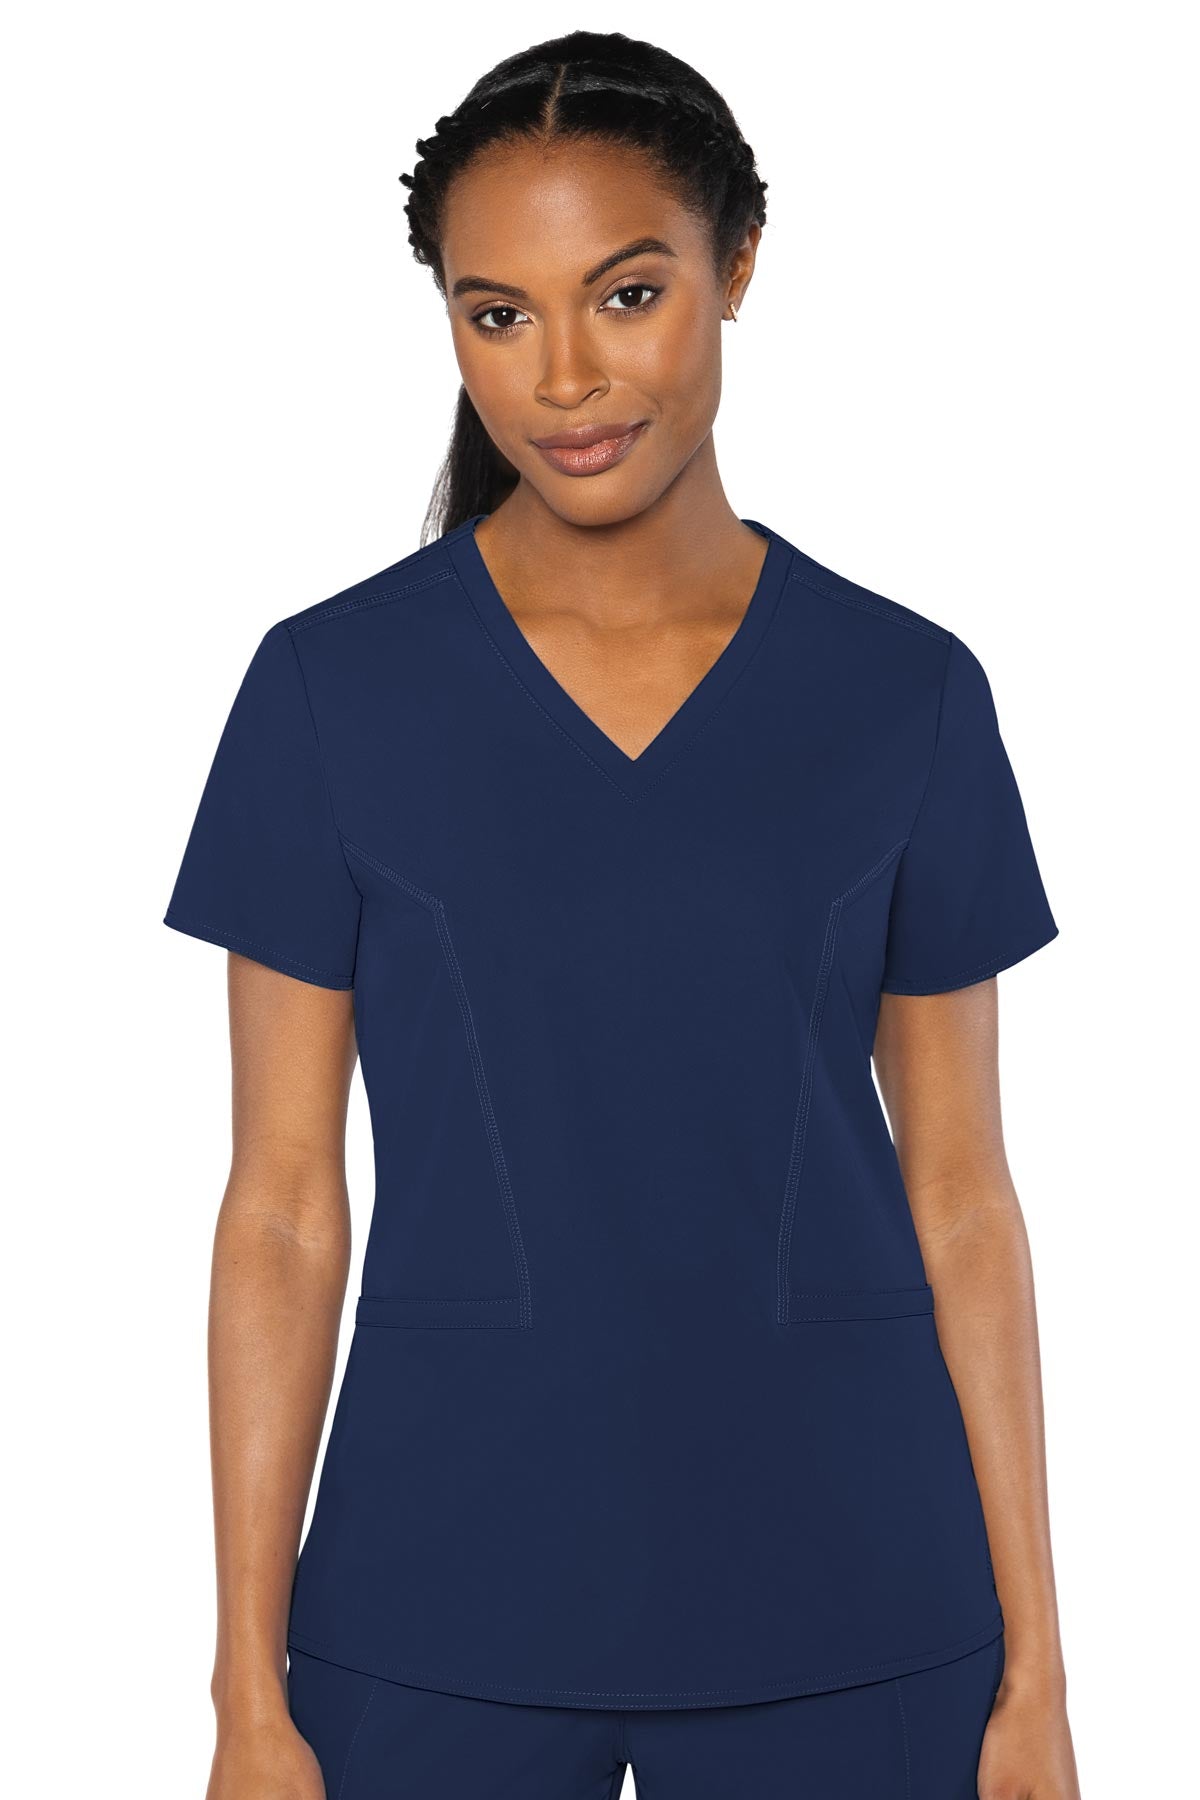 Med Couture Peaches Double V-Neck Top (9 Colors) XS-3XL